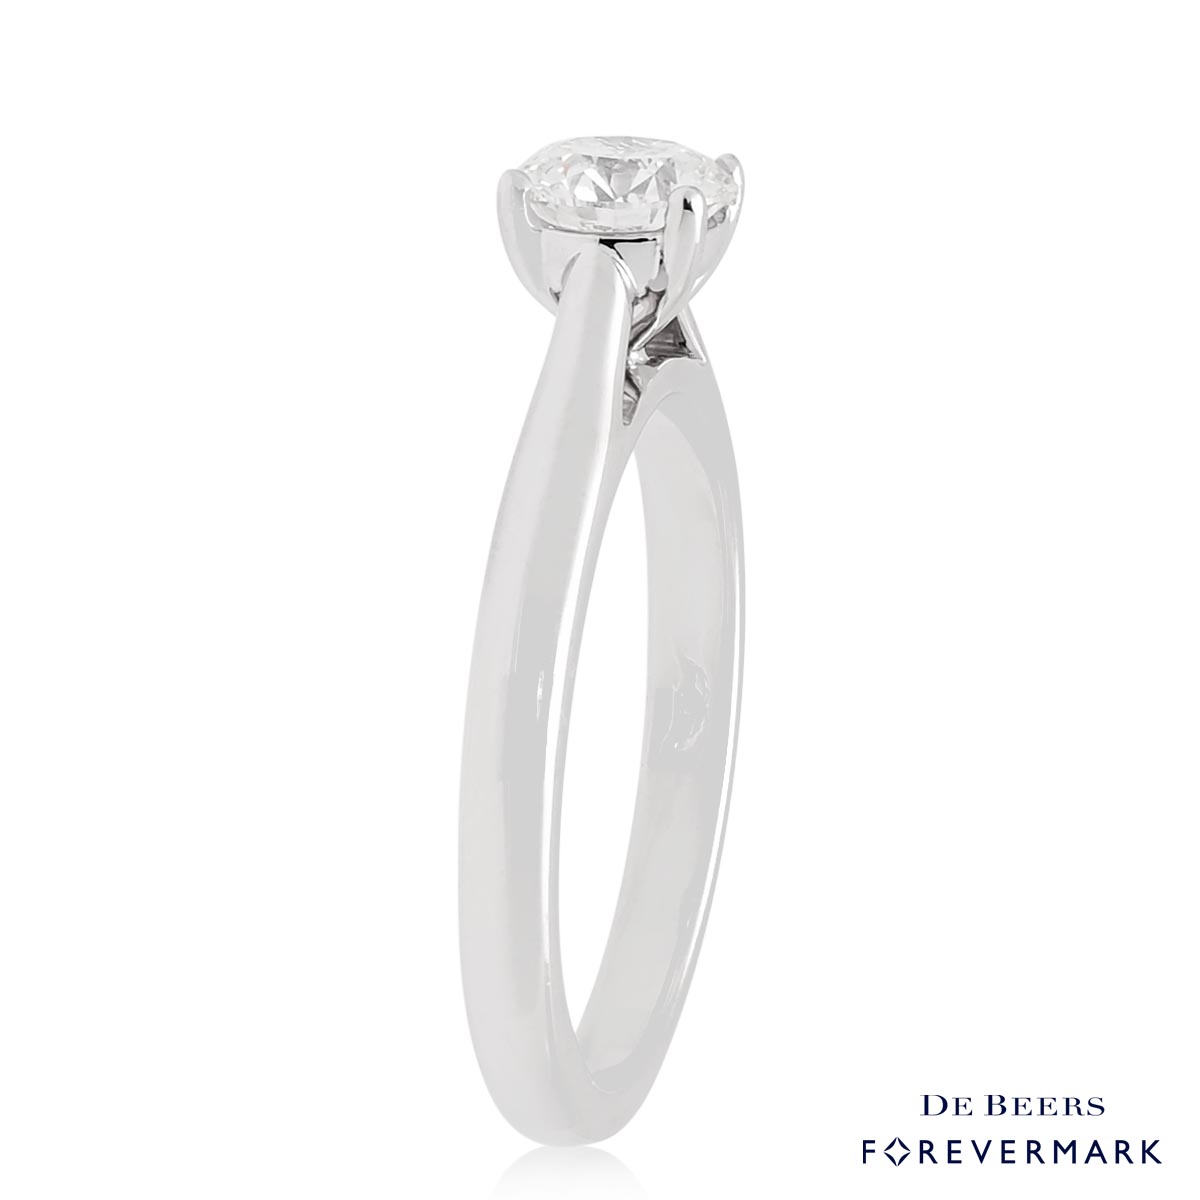 De Beers Forevermark Diamond Solitaire Engagement Ring in 14kt White Gold (3/4ct tw)